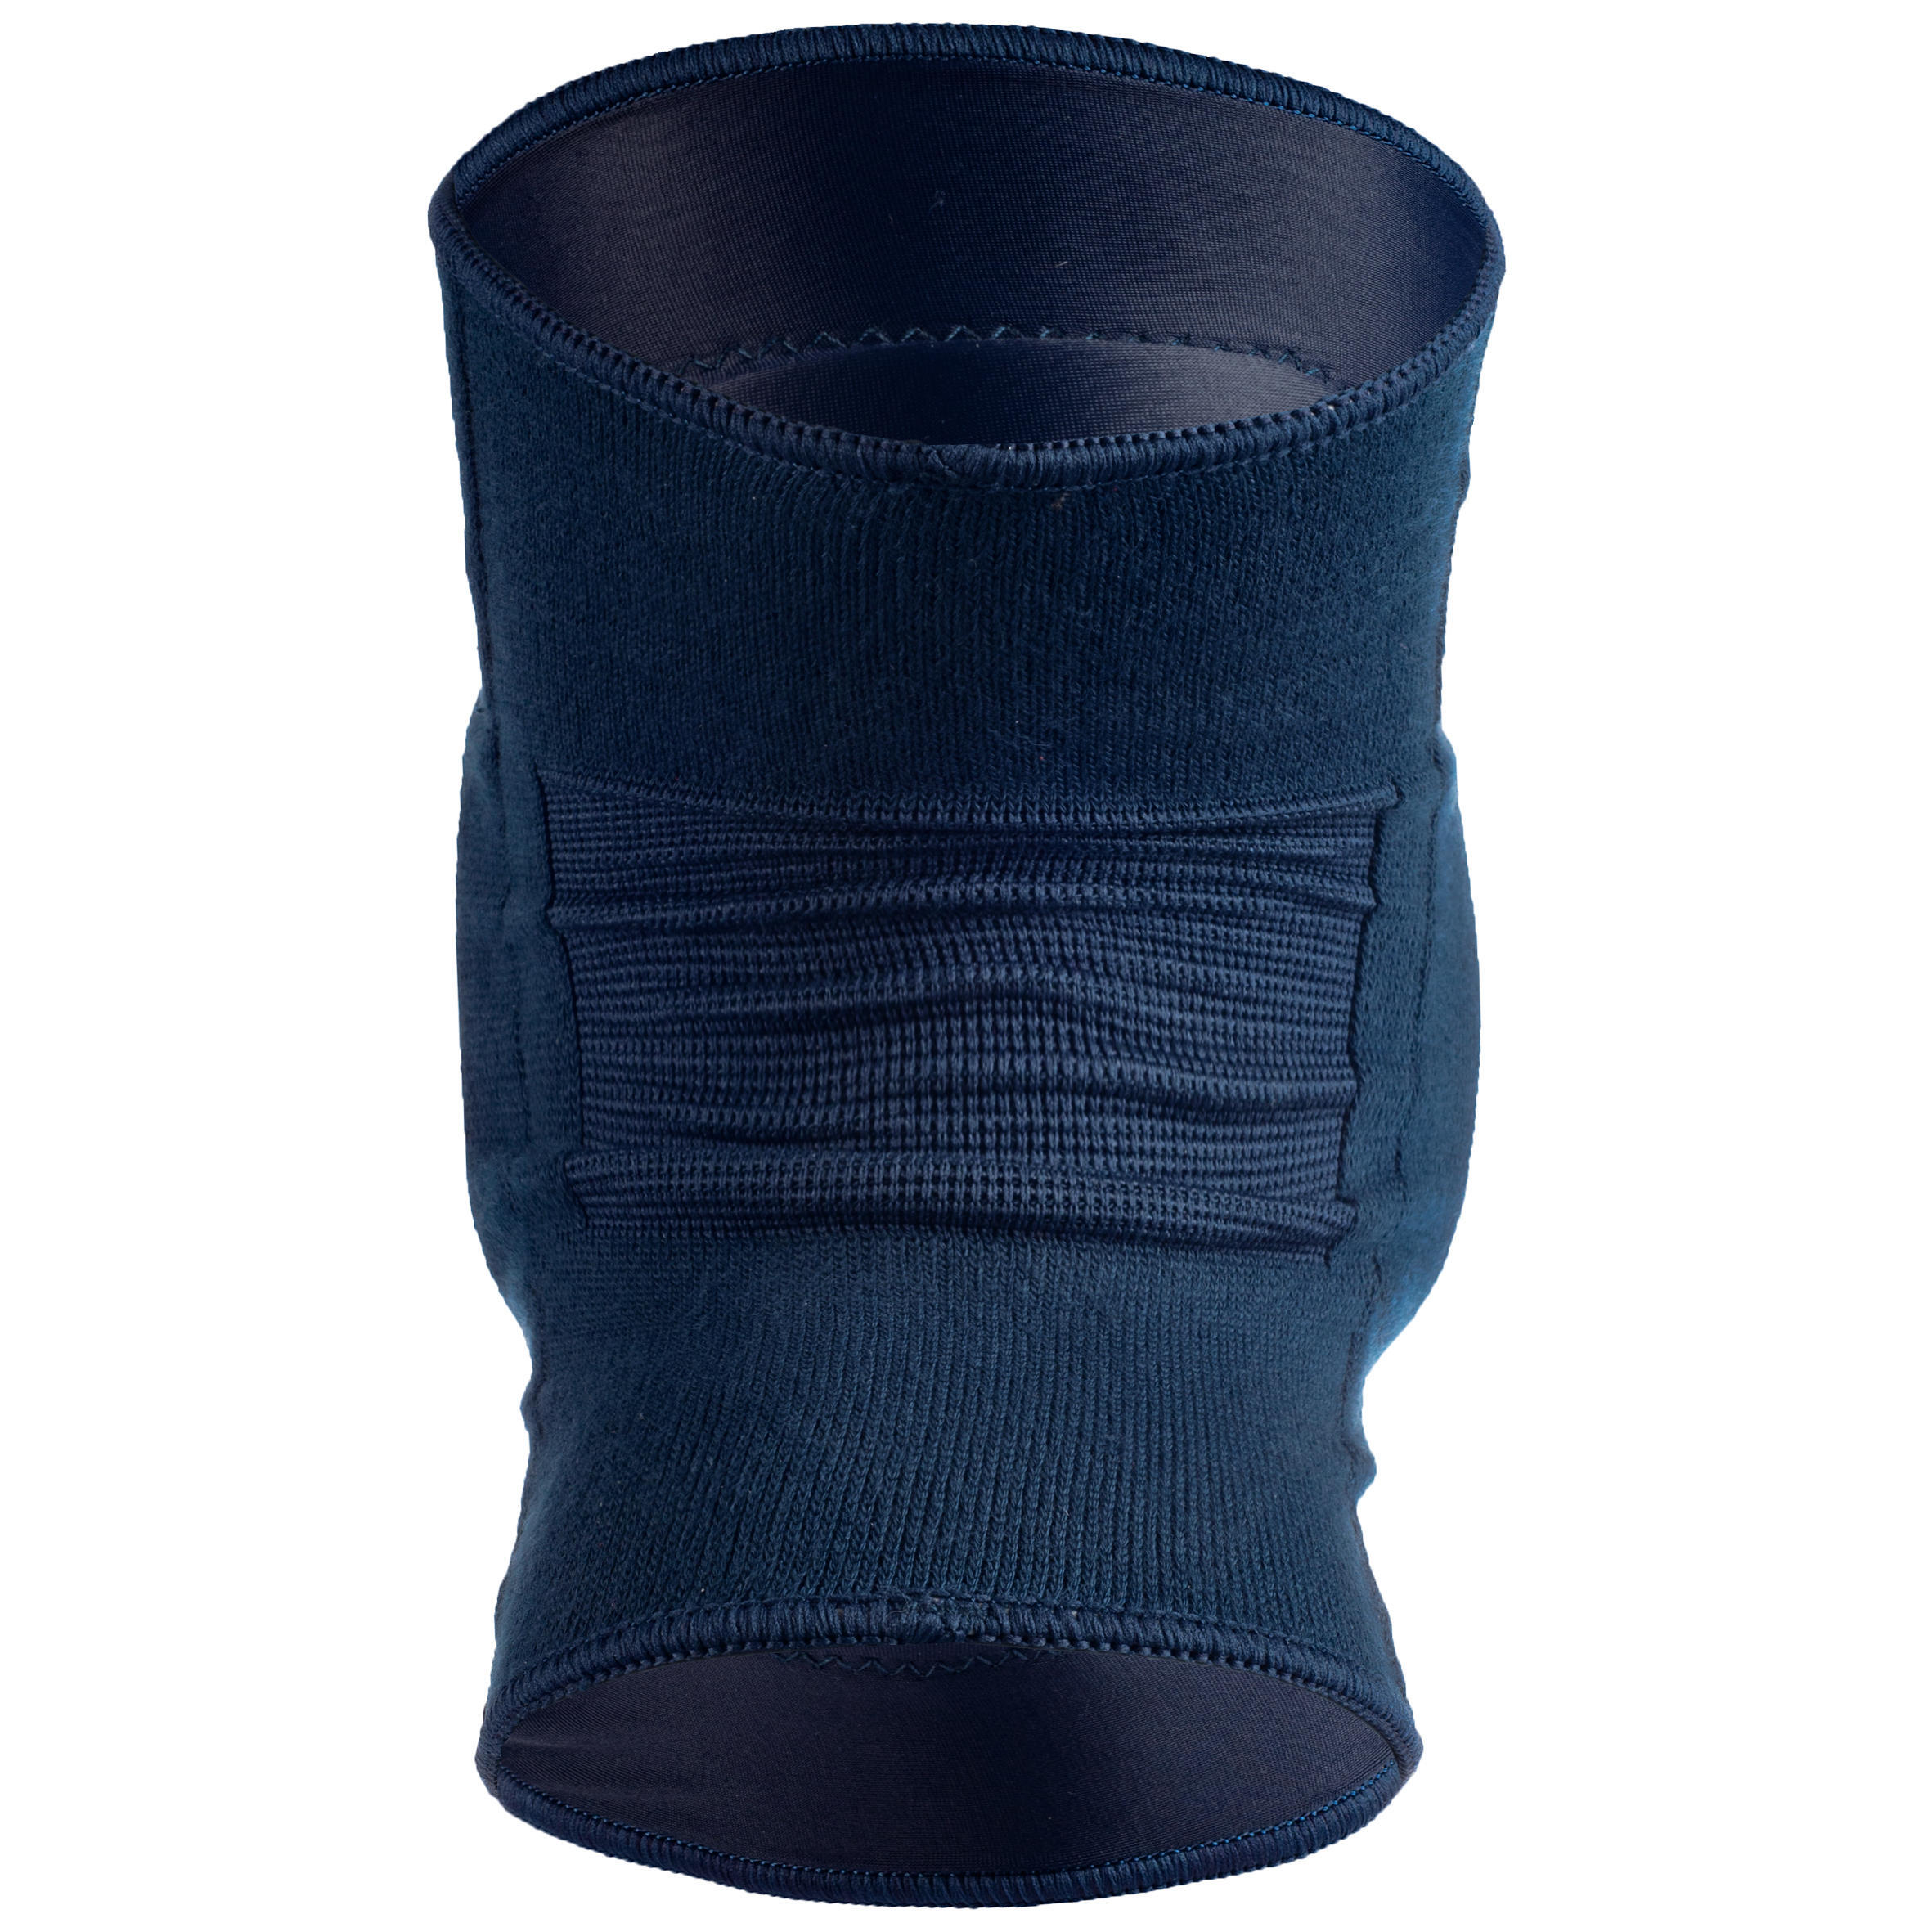 Volleyball Knee Pads VKP500 - Navy 2/6